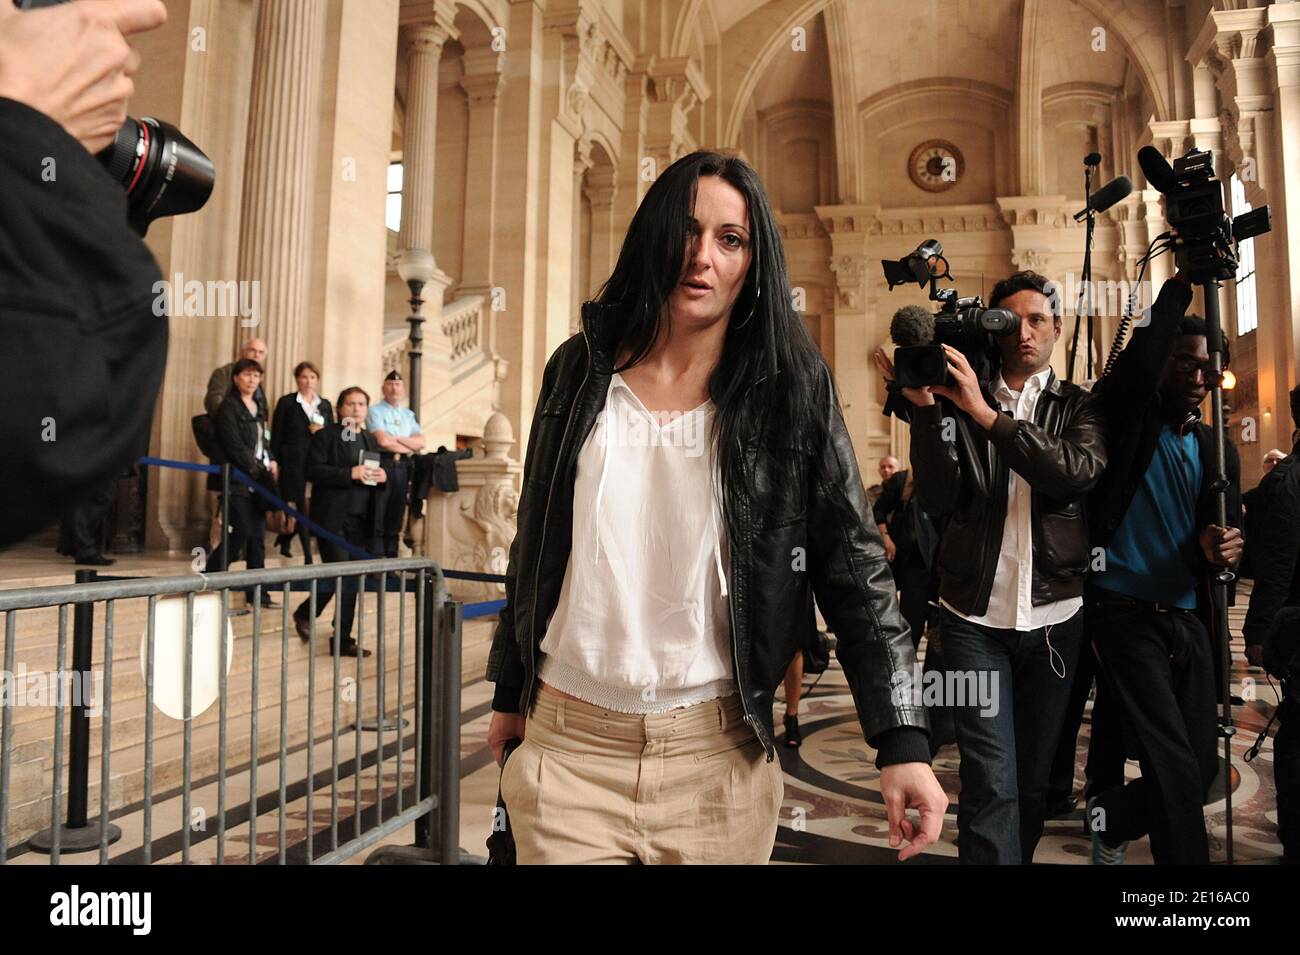 Stephanie Colonna, wife of Yvan Colonna leaves Paris court hall in Paris, France on May 2, 2011 after the opening of Yvan Colonna's appeal trial for the murder in 1998 of Claude Erignac, France's top state official on the Mediterranean island of Corsica. Photo by Giancarlo Gorassini/ABACAPRESS.COM Stock Photo